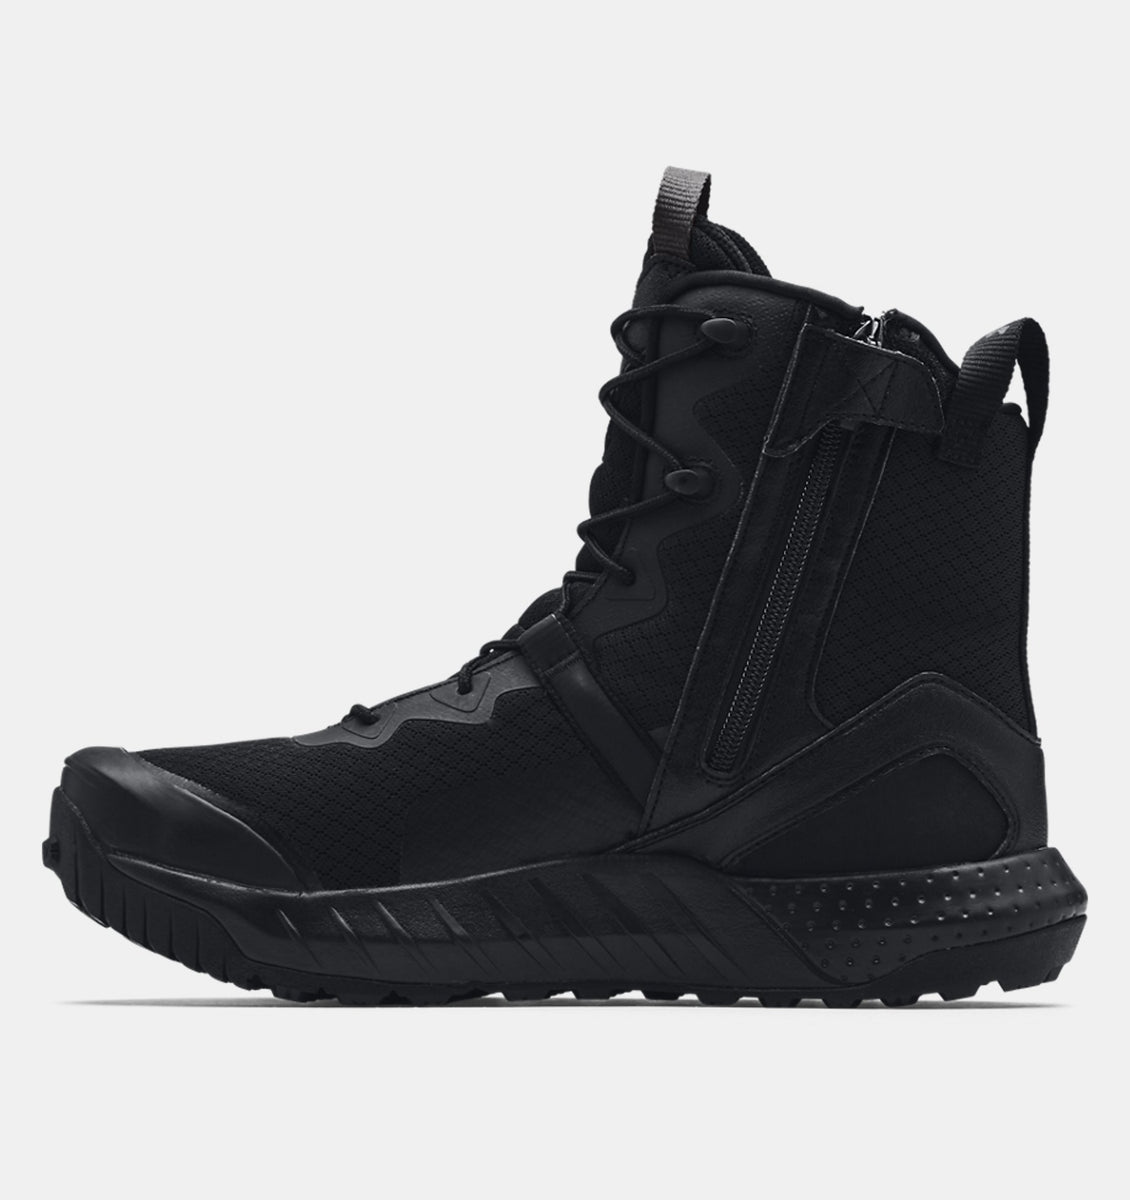 Under Armour Women's Micro G® Valsetz Mid Tactical Boots We took one of our  best, most durable, and crazy-comfortable tactical boots up a notch with  Micro G® midsole cushioning you'll appreciate more